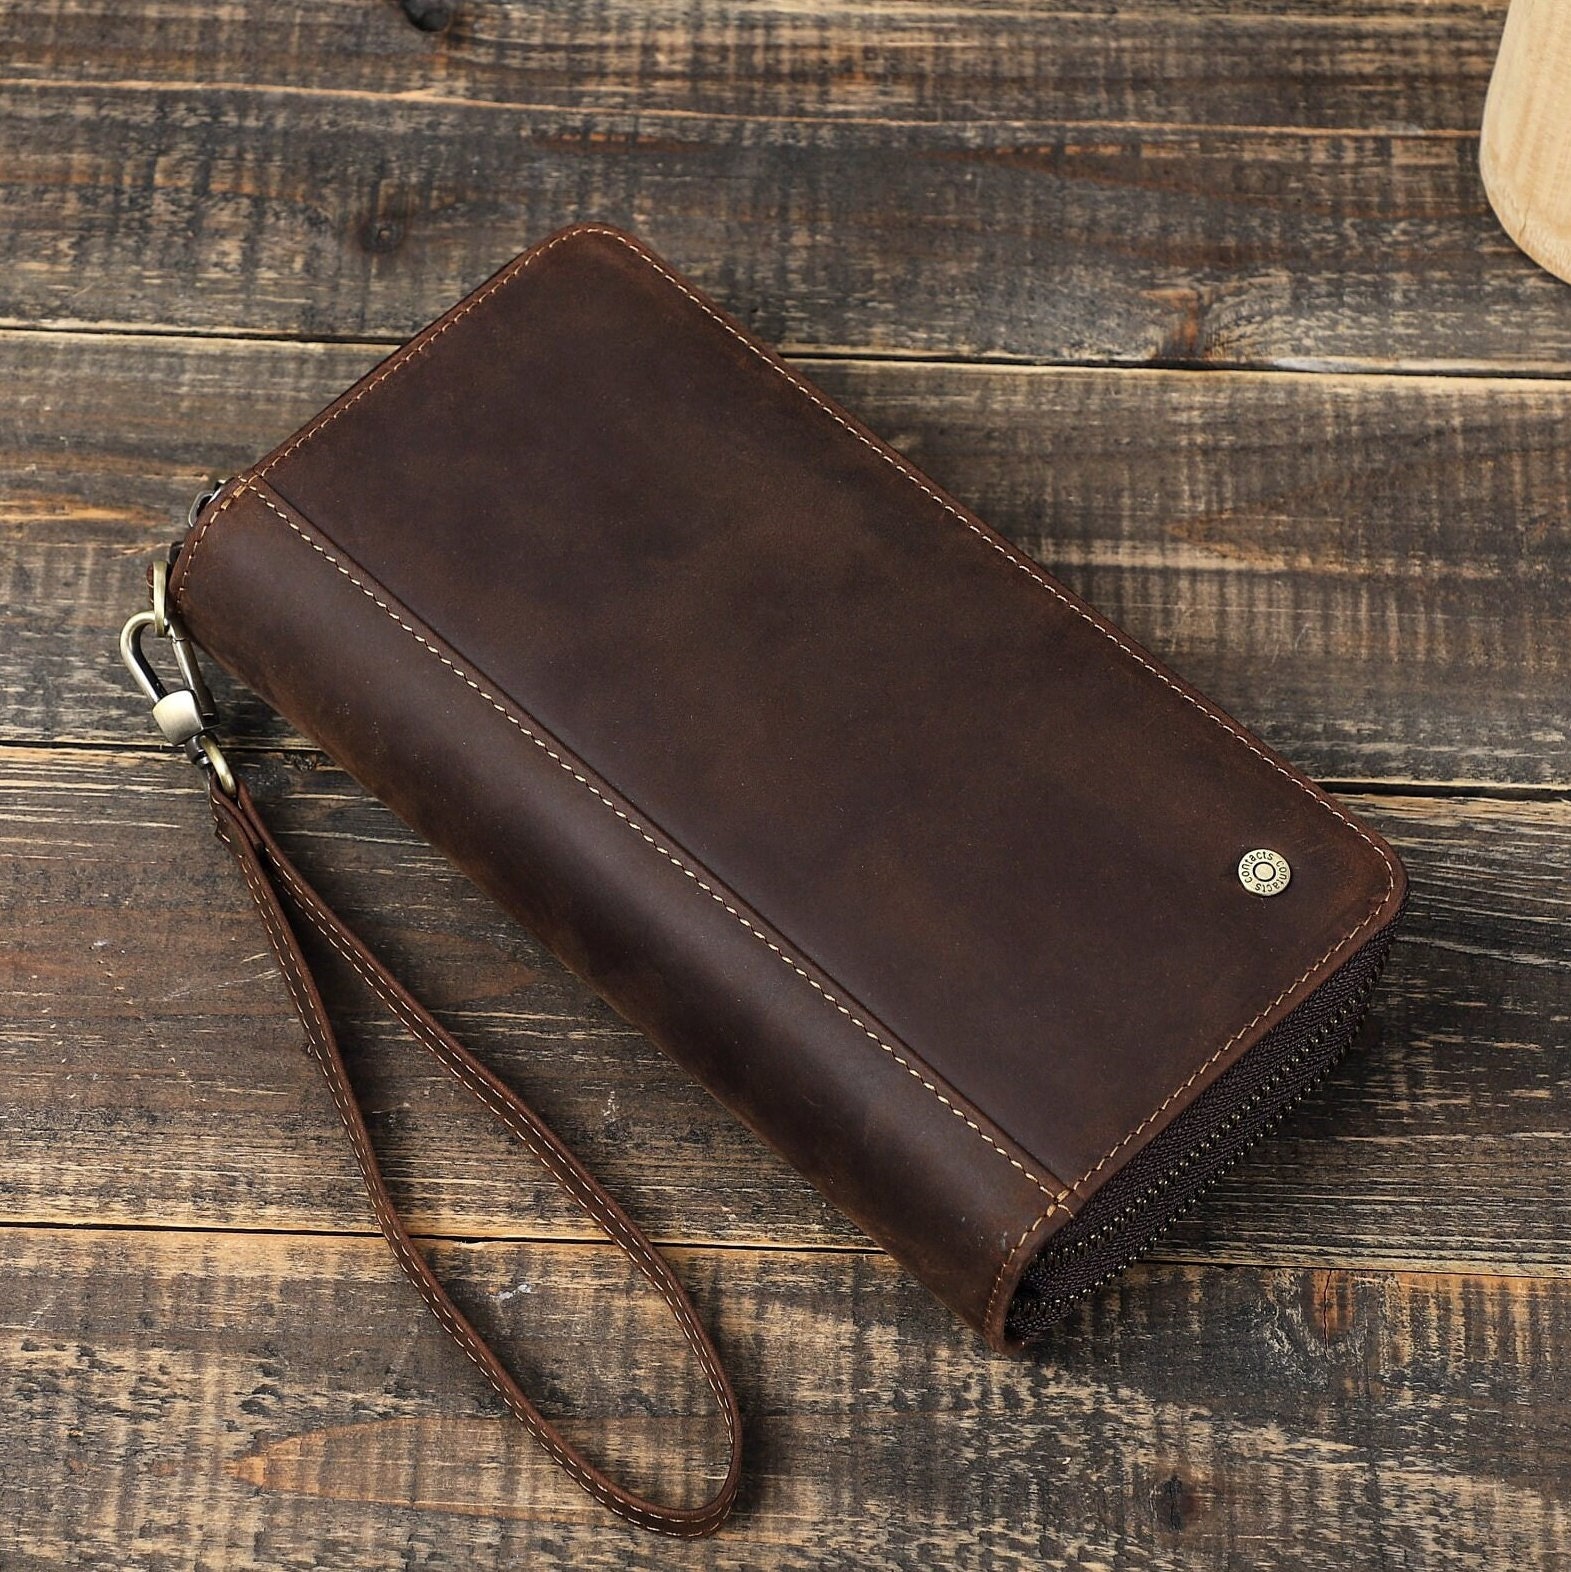 Vintage Clutch Bag for Men,Full Gain Leather Wristlet Wallet with Pen Holder,Clutch Purse Multi-Card Holder,Anniversary Gift for Man